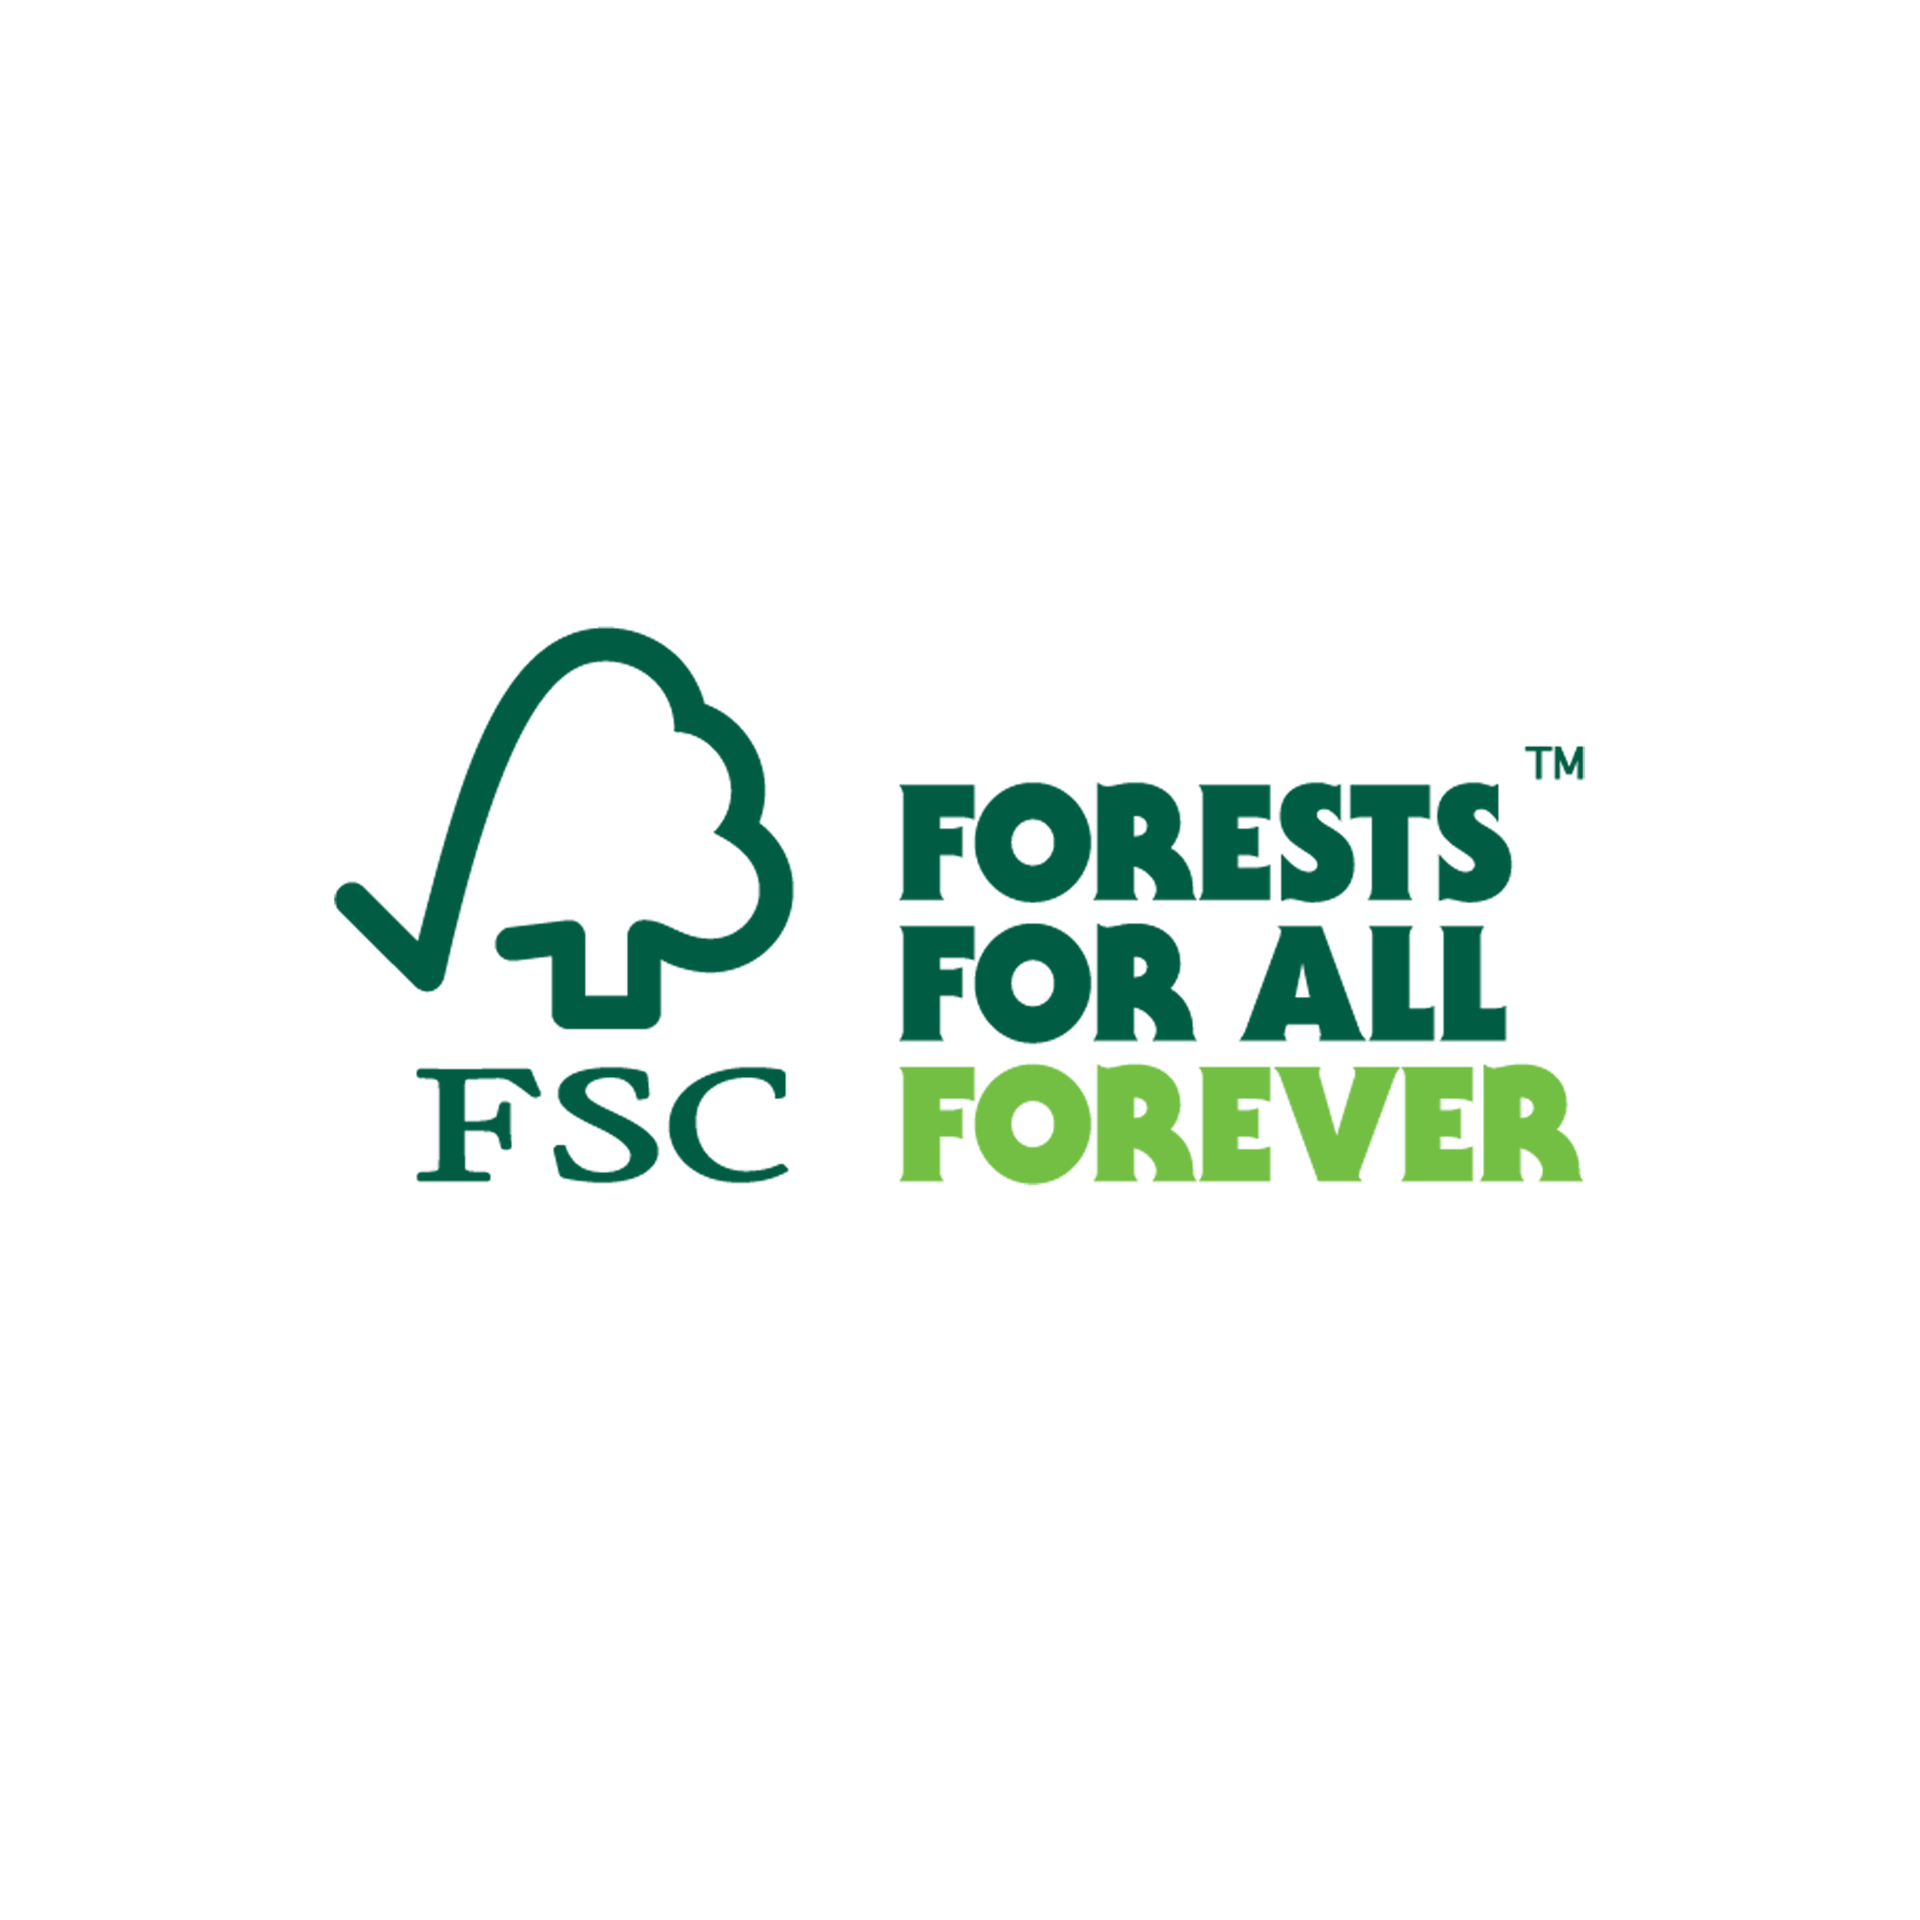 Forests For All Forever logo